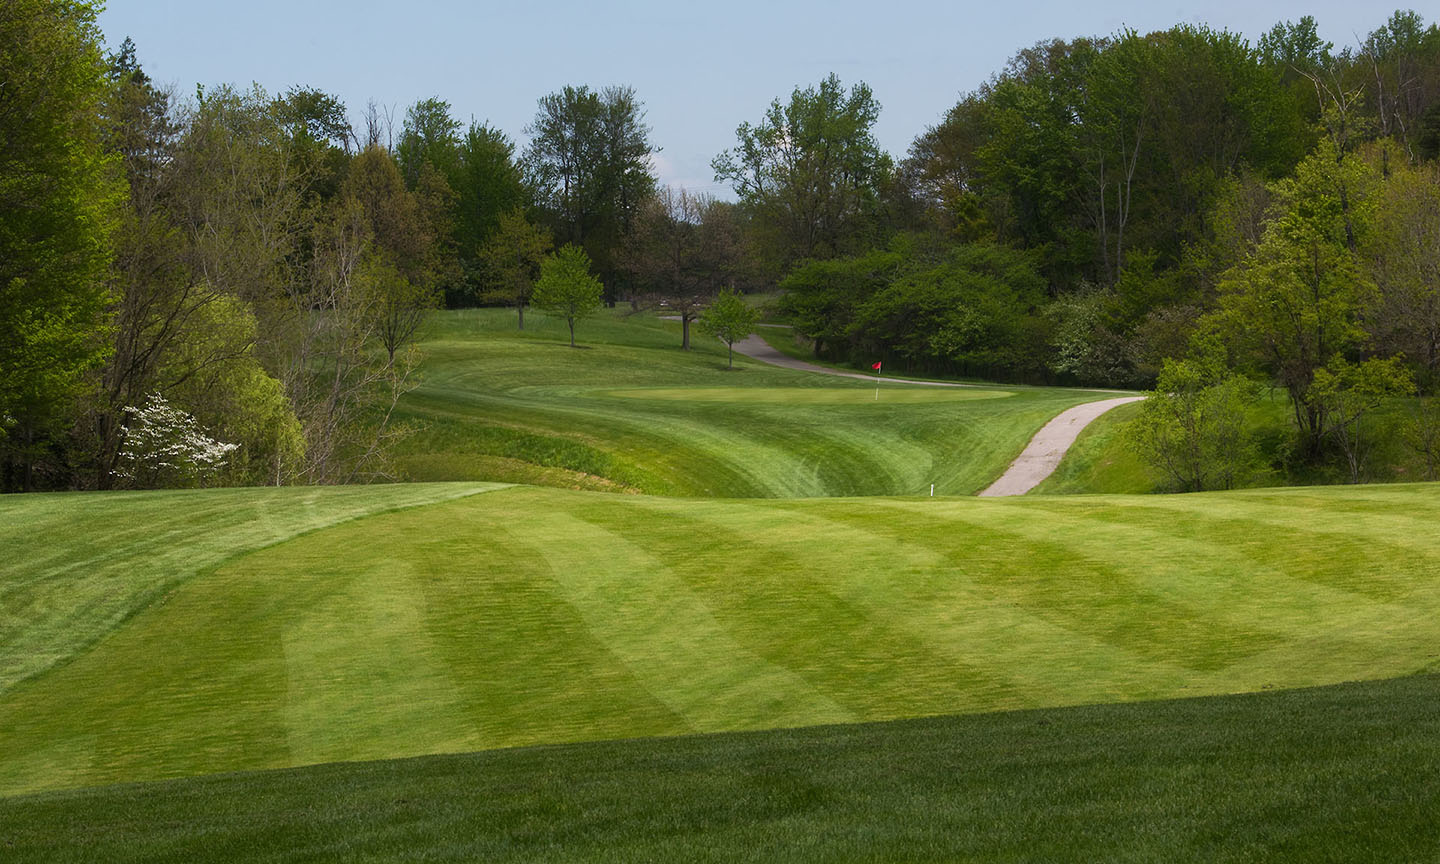 The Double Bogey Grille at Shawnee Hills